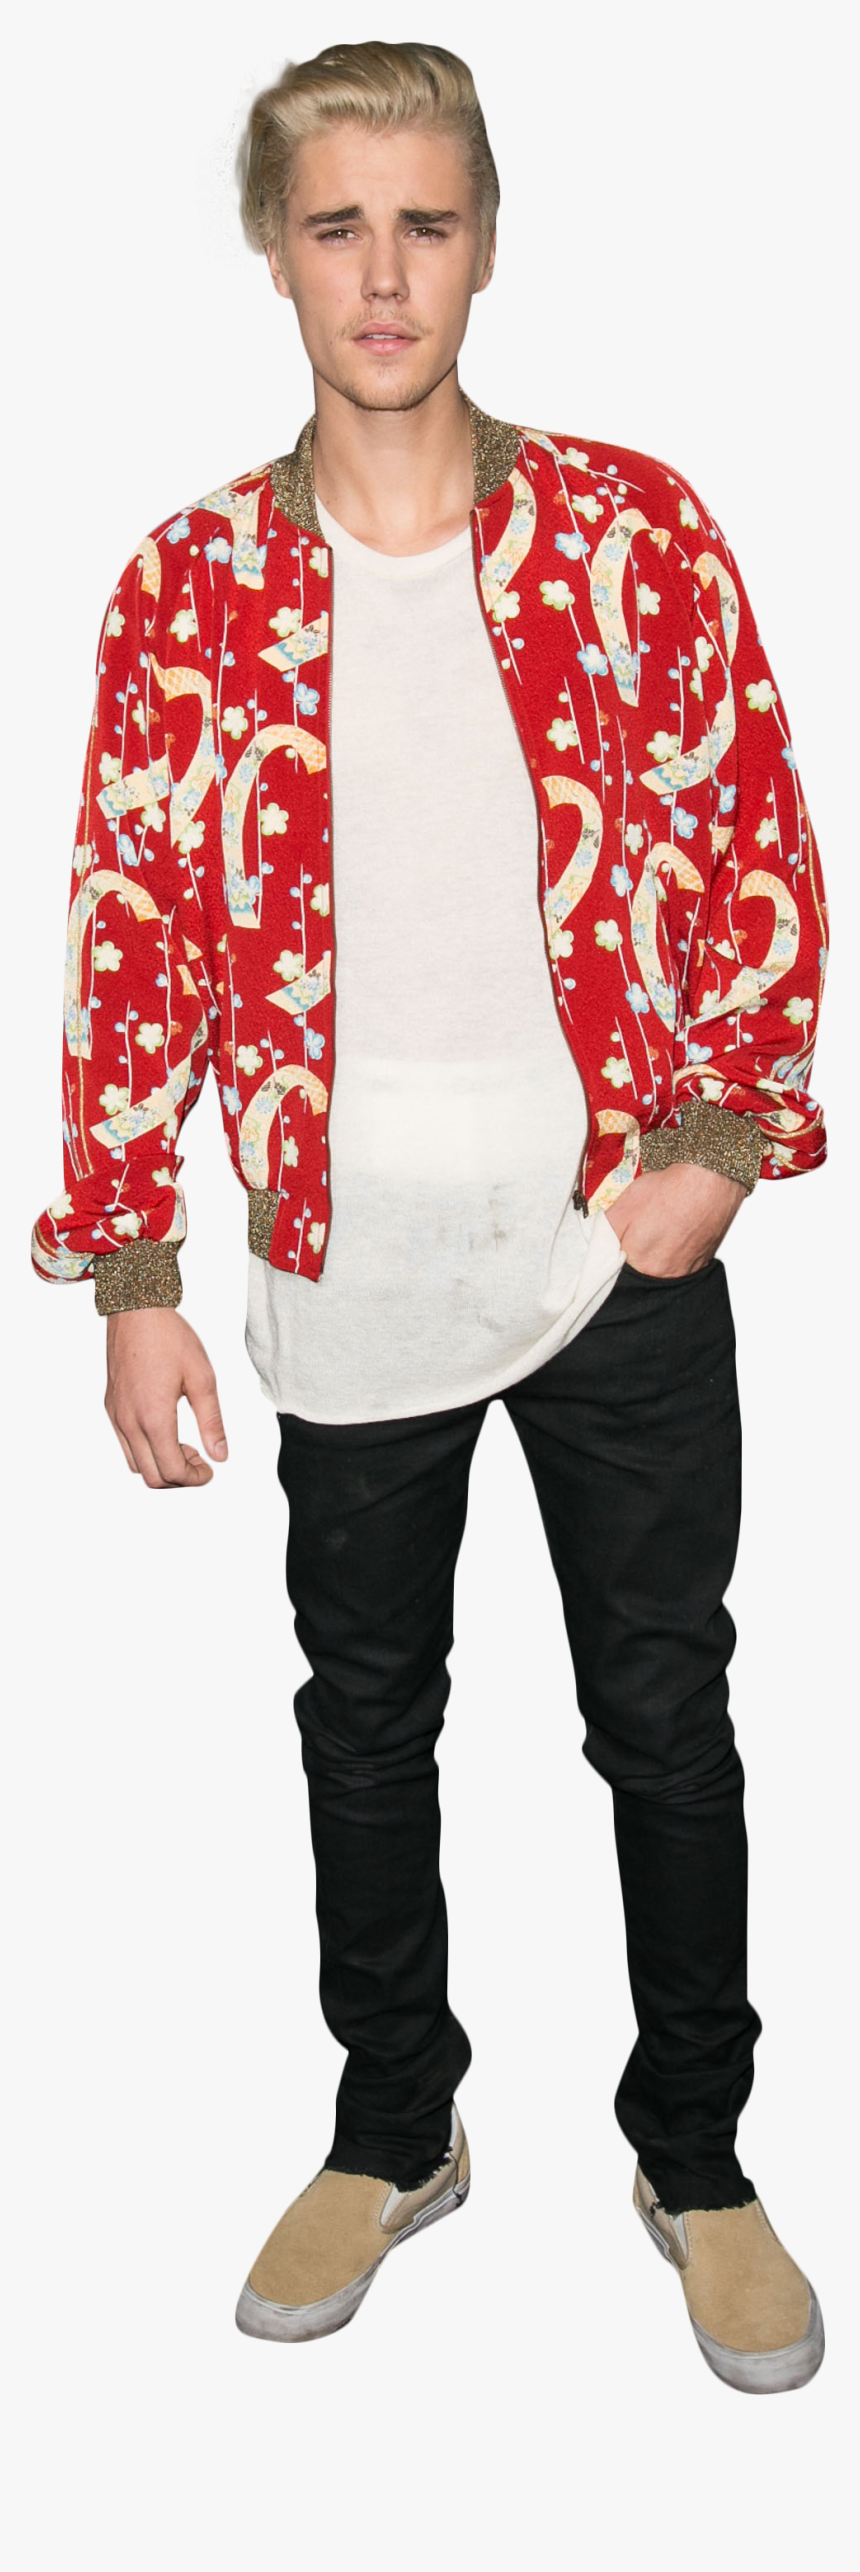 Justin Bieber Dressed In A Red Shirt Png Image, Transparent Png, Free Download